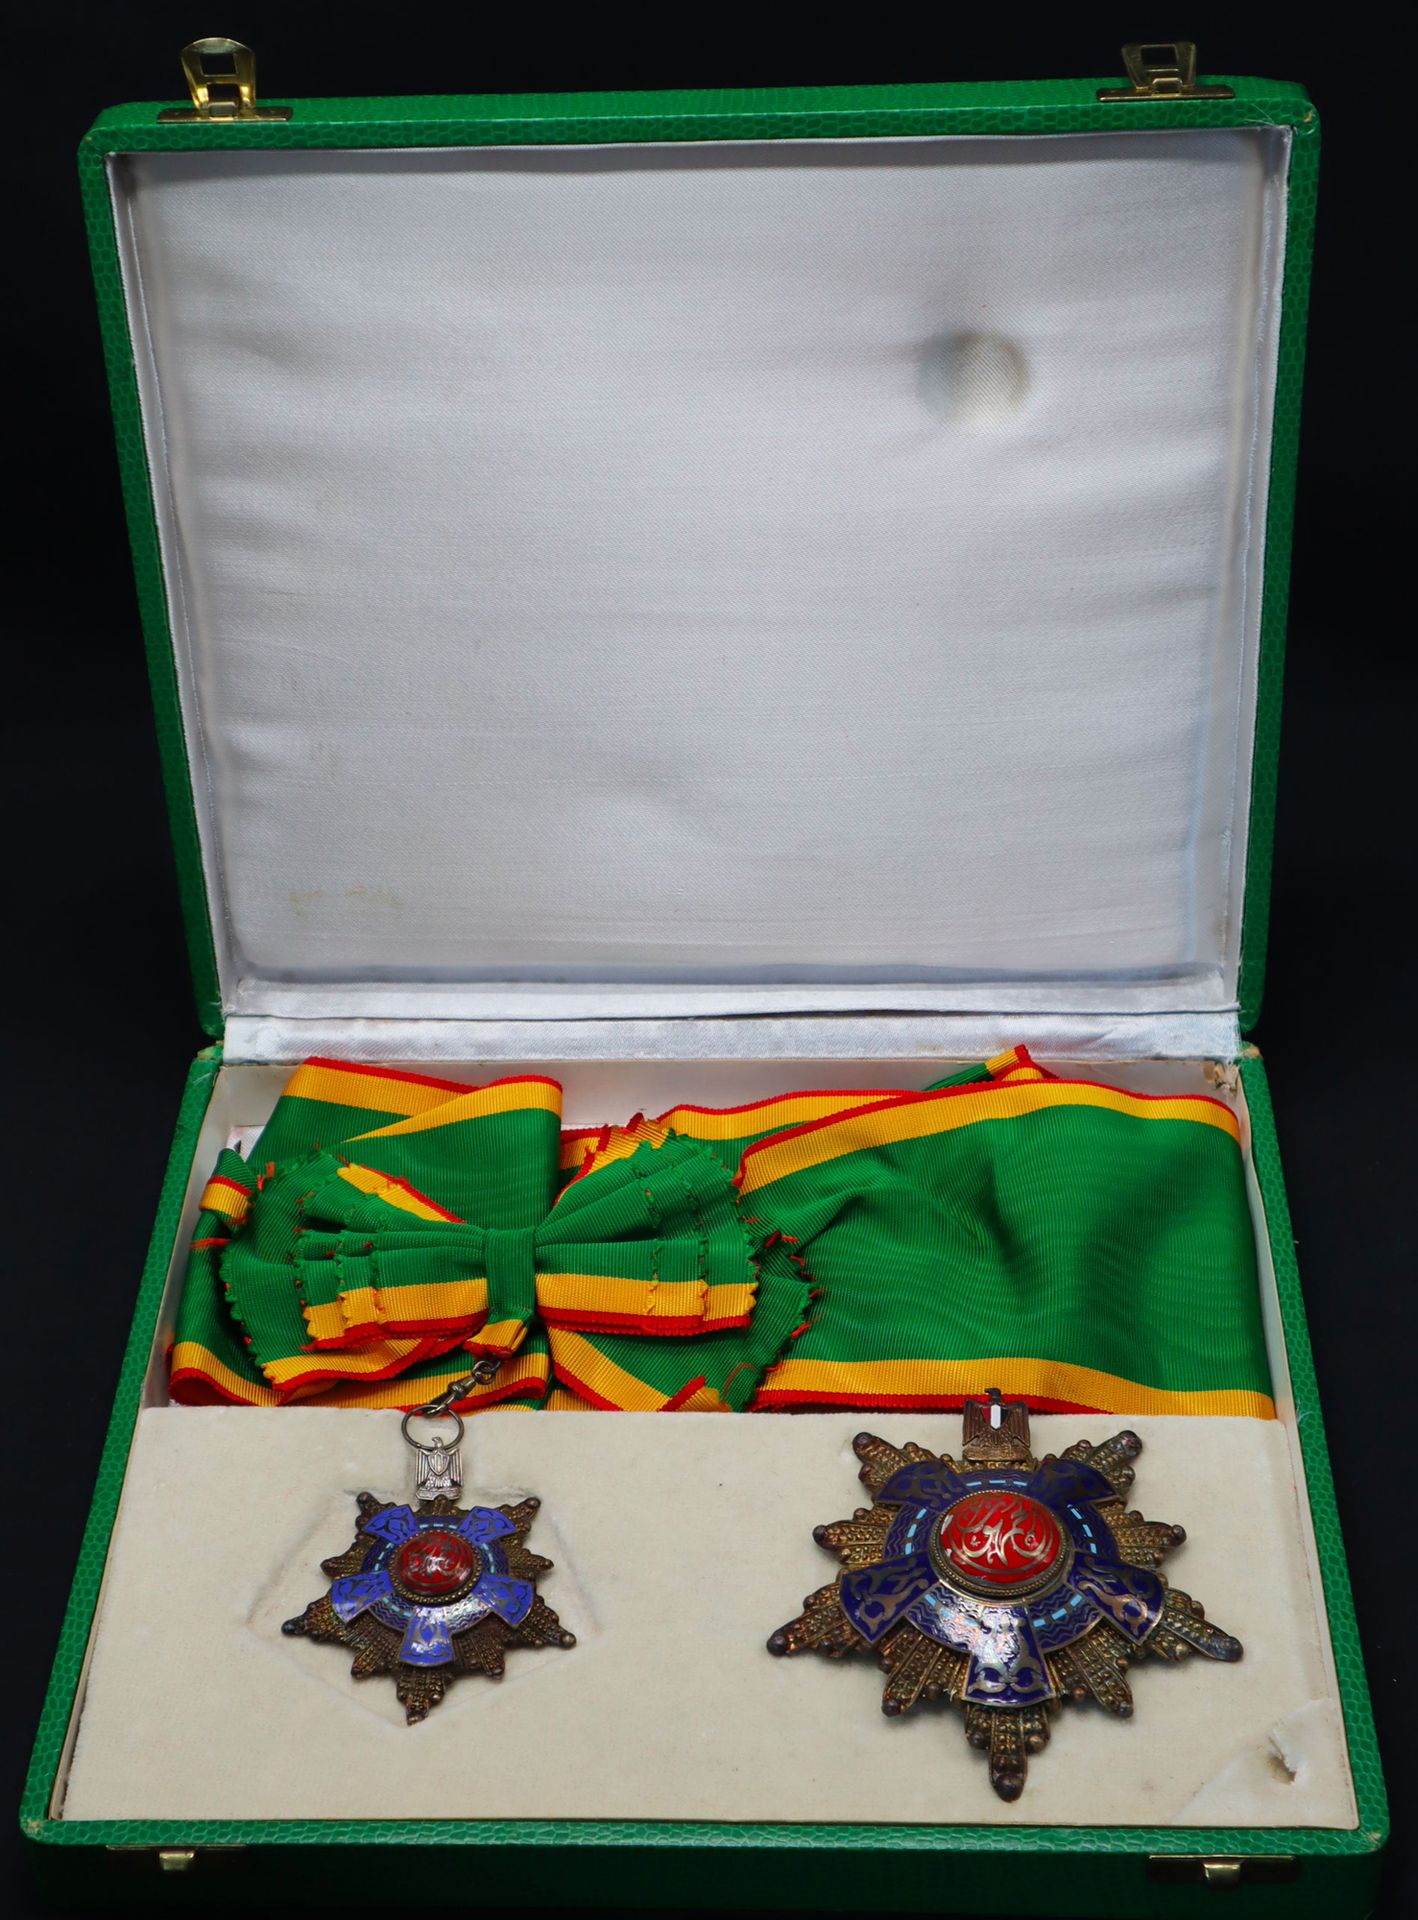 Null Egypt - Order of the Republic, founded in 1953, set of grand crosses compri&hellip;